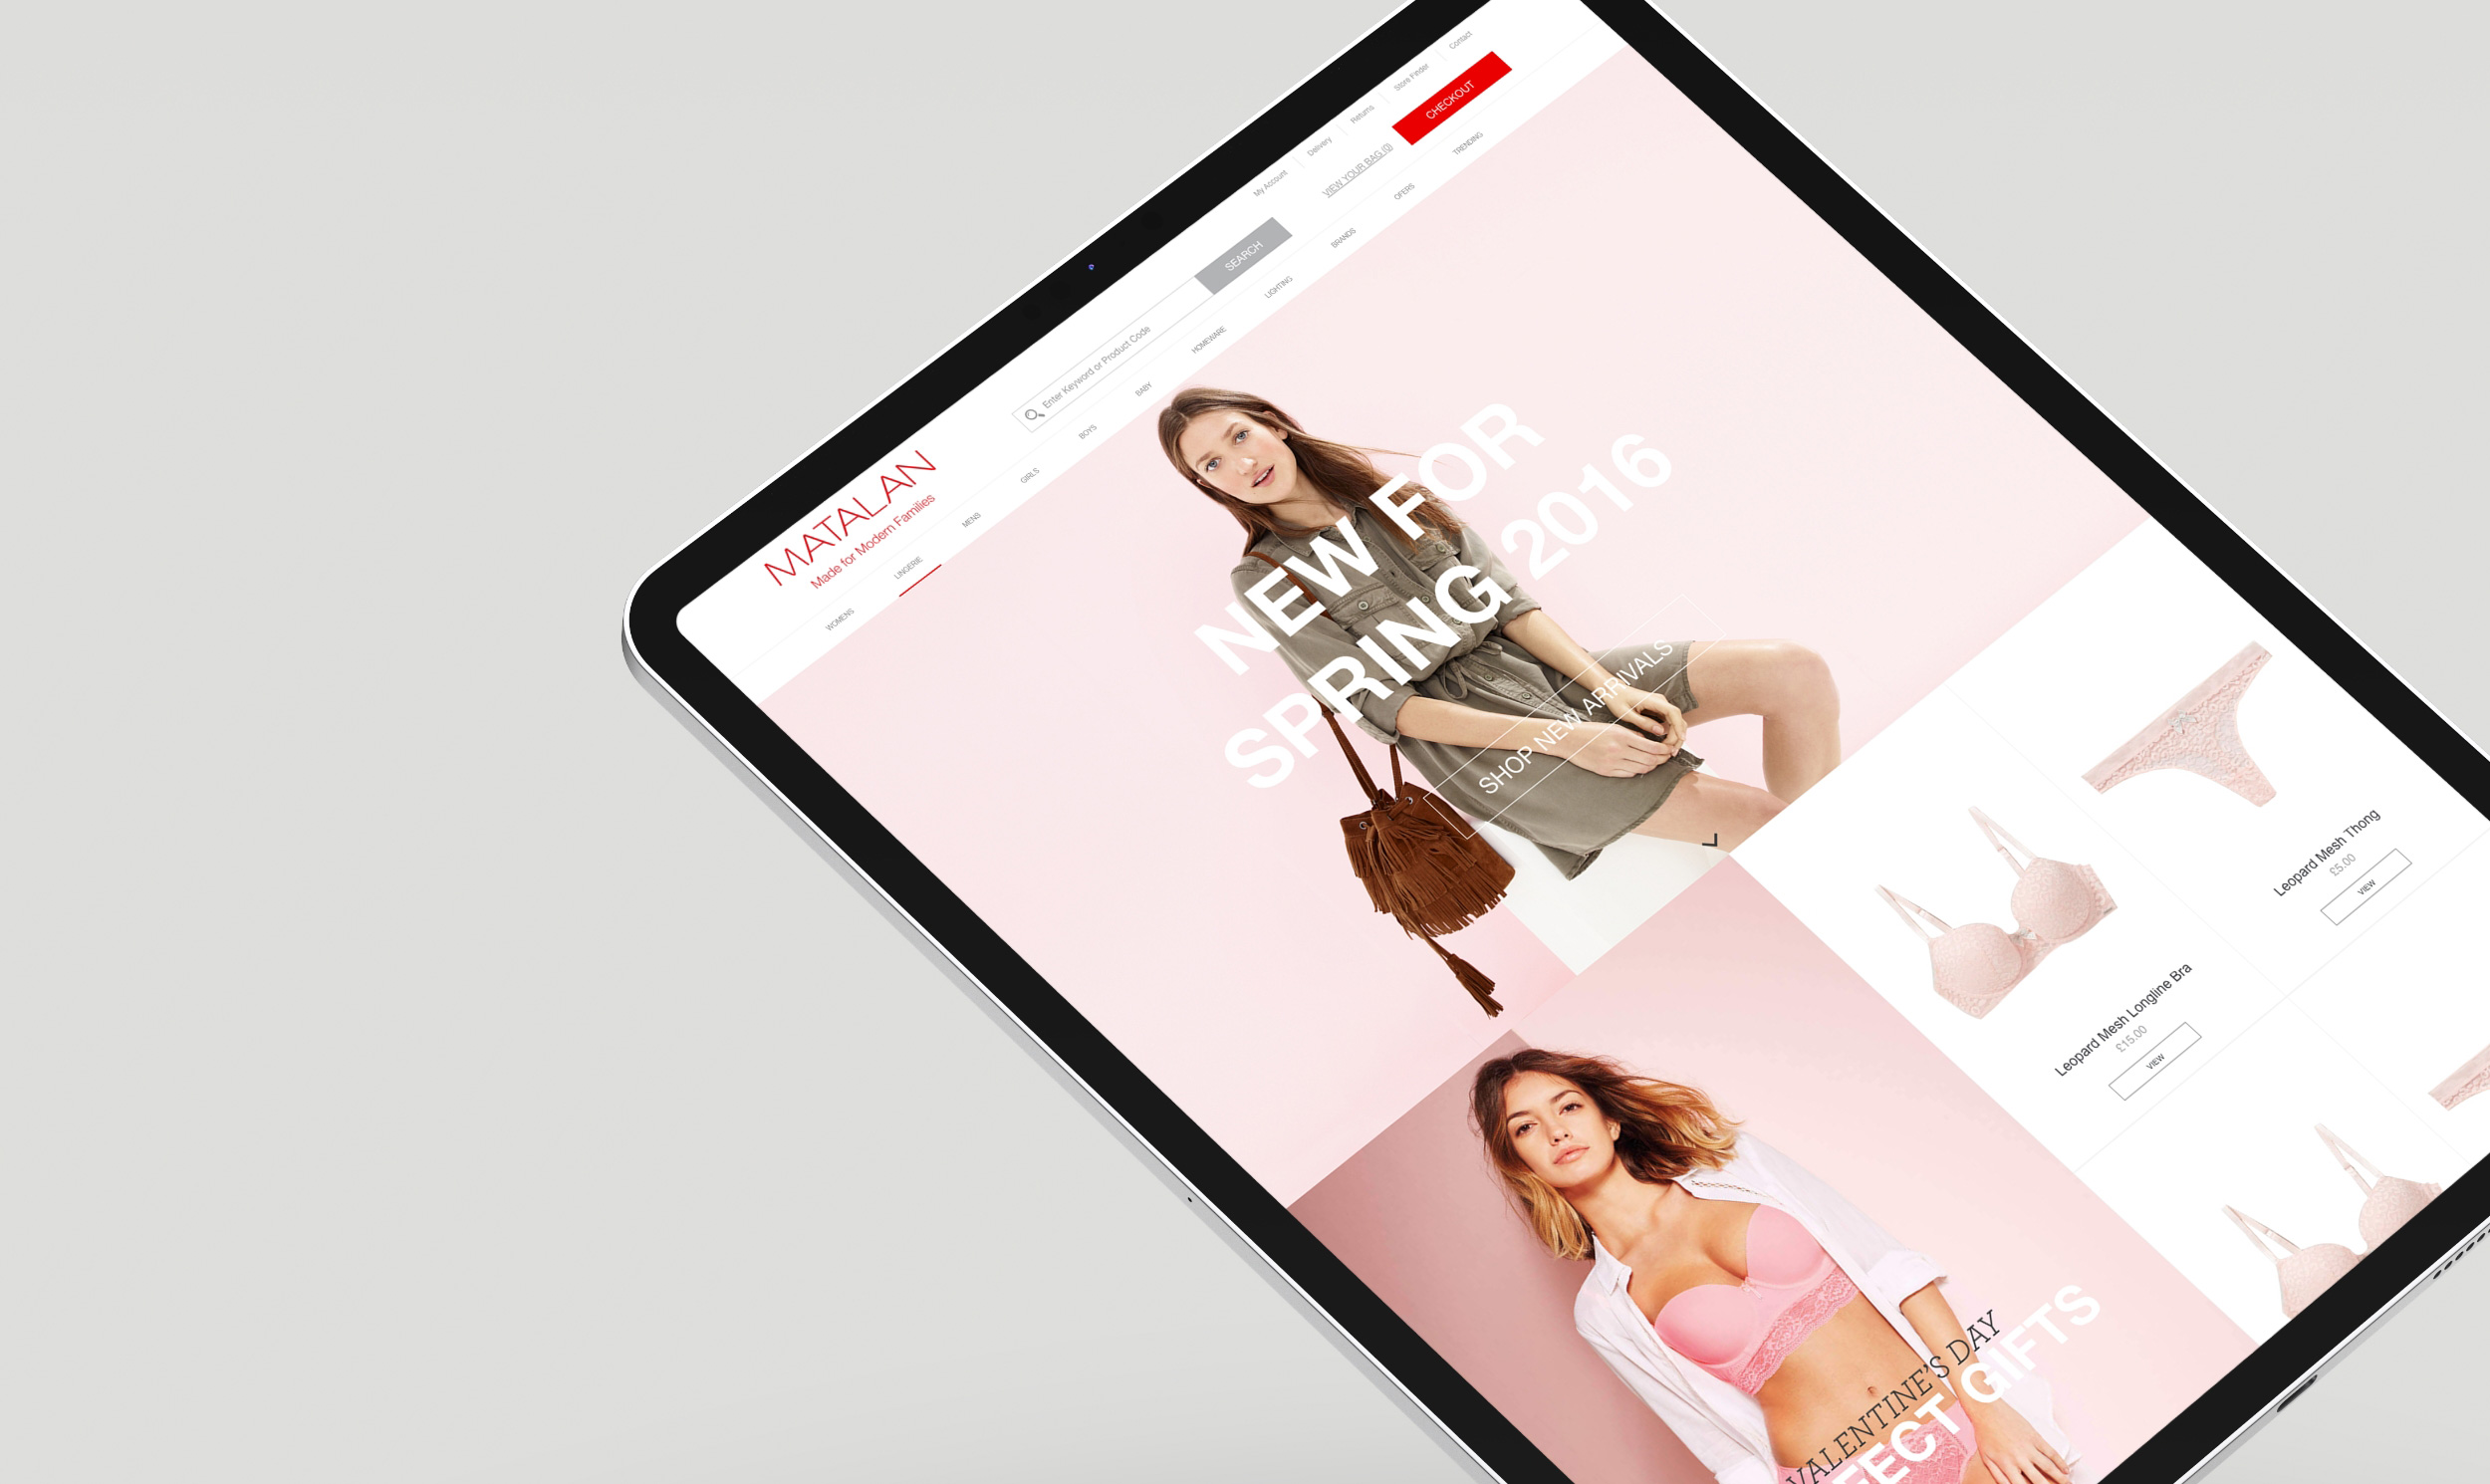 Matalan.co.uk website design and user experience design by Gaz Battersby